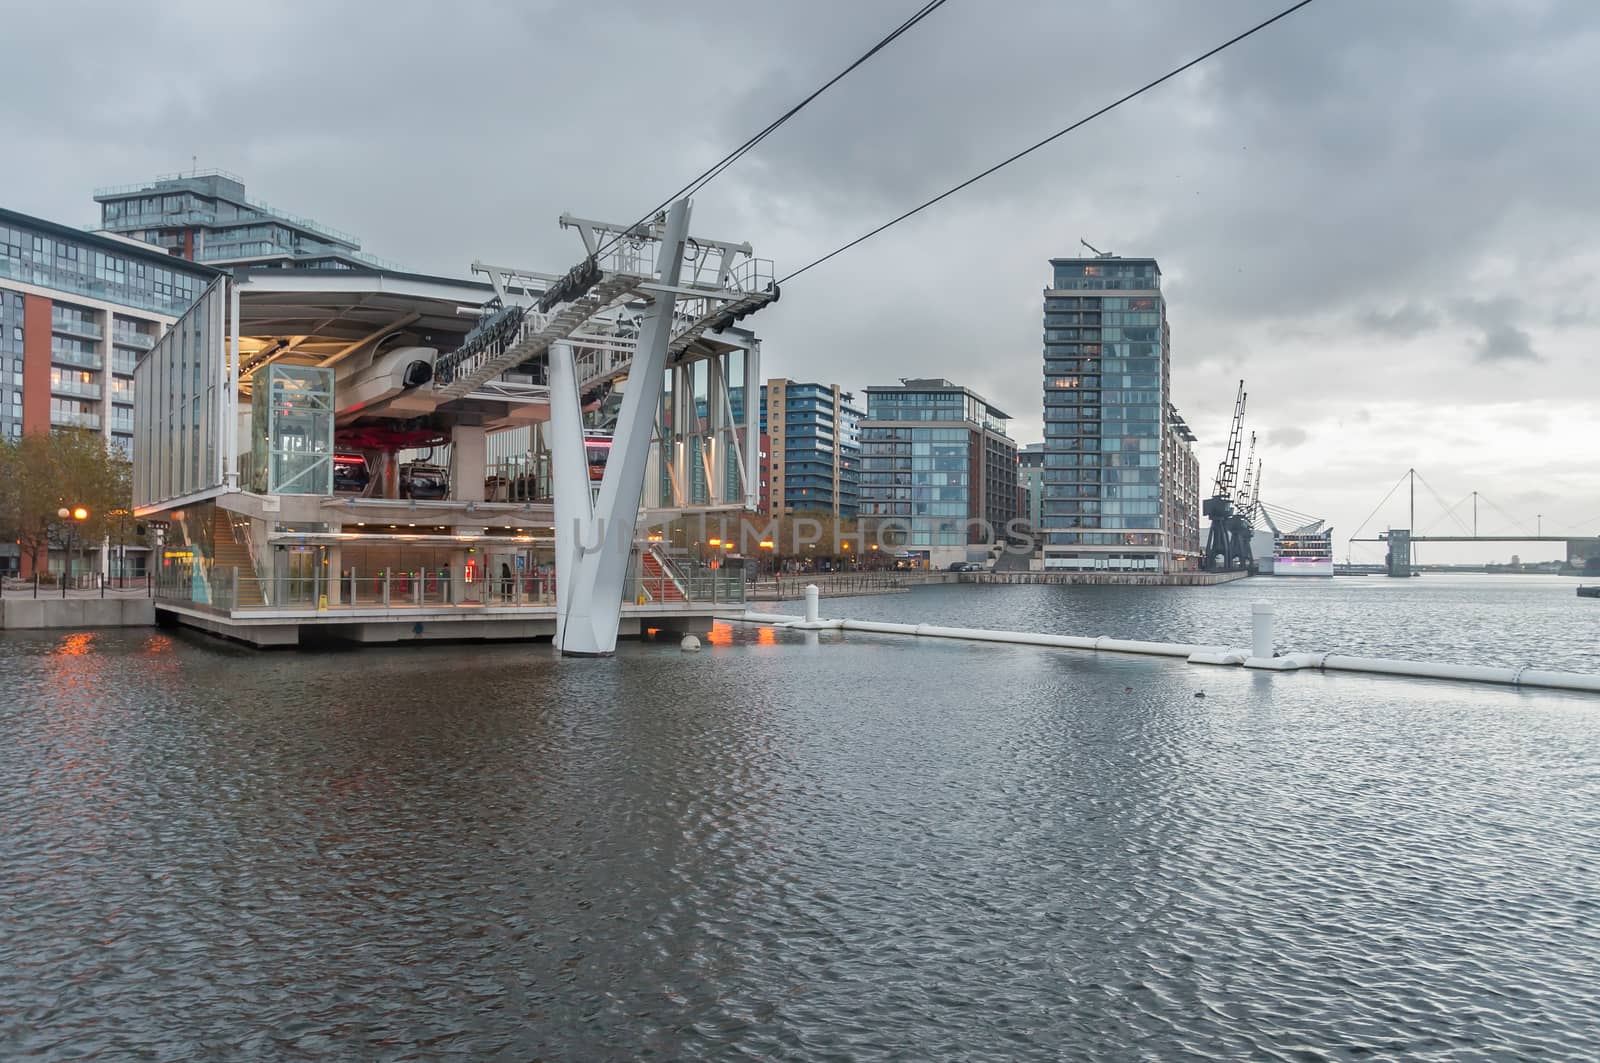 Royal Victoria Docks cable car station on a rainy day. by mkos83